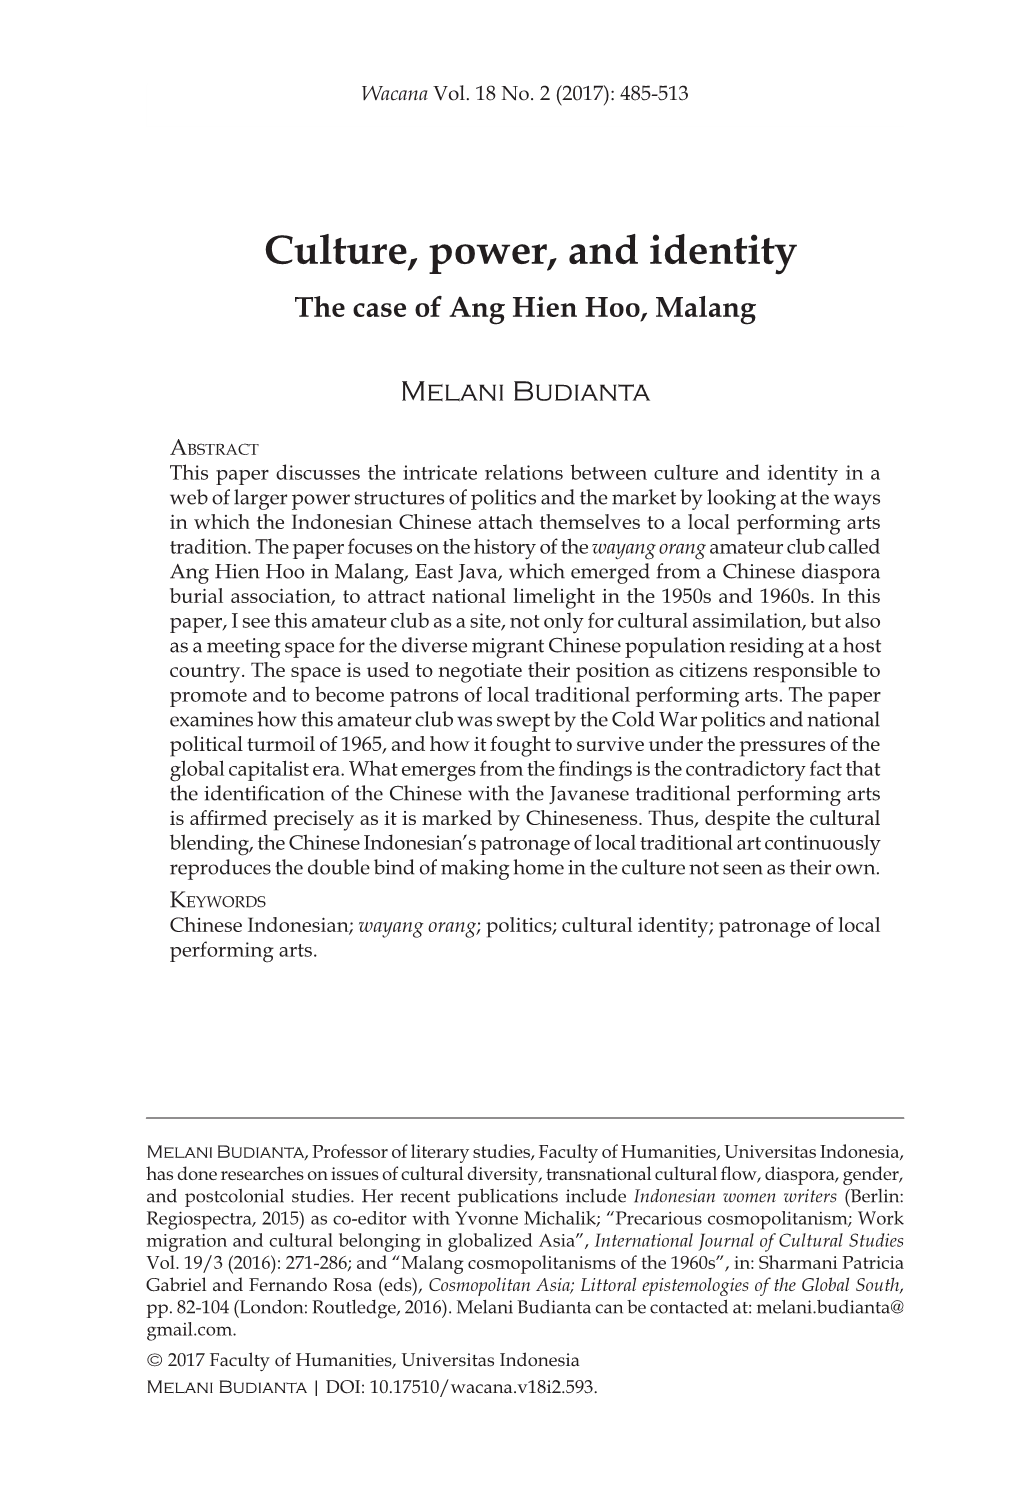 Culture, Power, and Identity the Case of Ang Hien Hoo, Malang